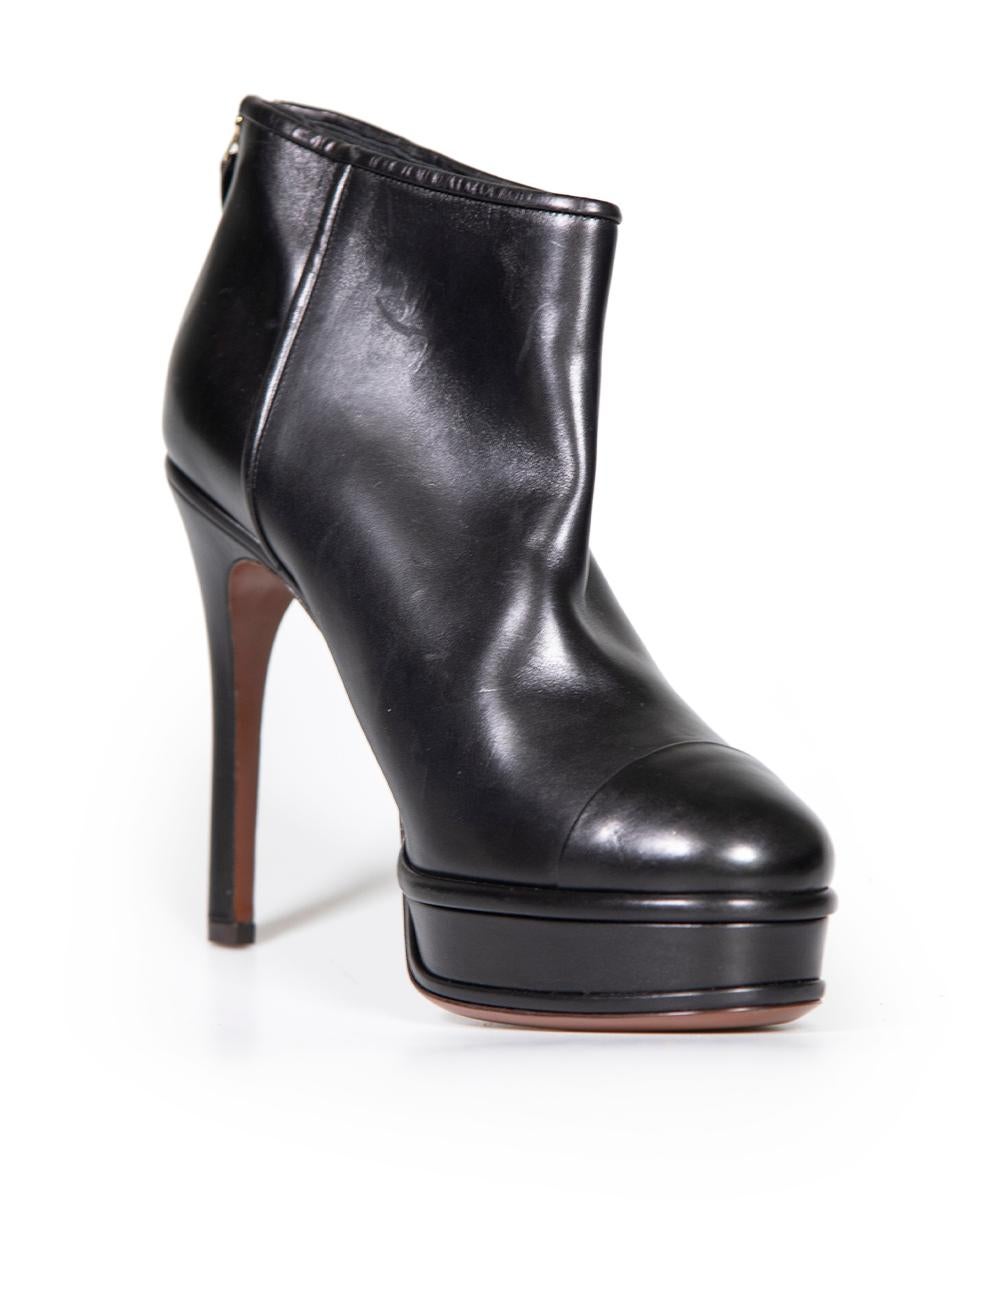 CONDITION is Very good. Minimal wear to boots is evident. Minimal wear to both sides and toes of both boots with very light scratches to the leather on this used Chanel designer resale item.
 
 Details
 Black
 Leather
 Ankle boots
 Round toe
 High